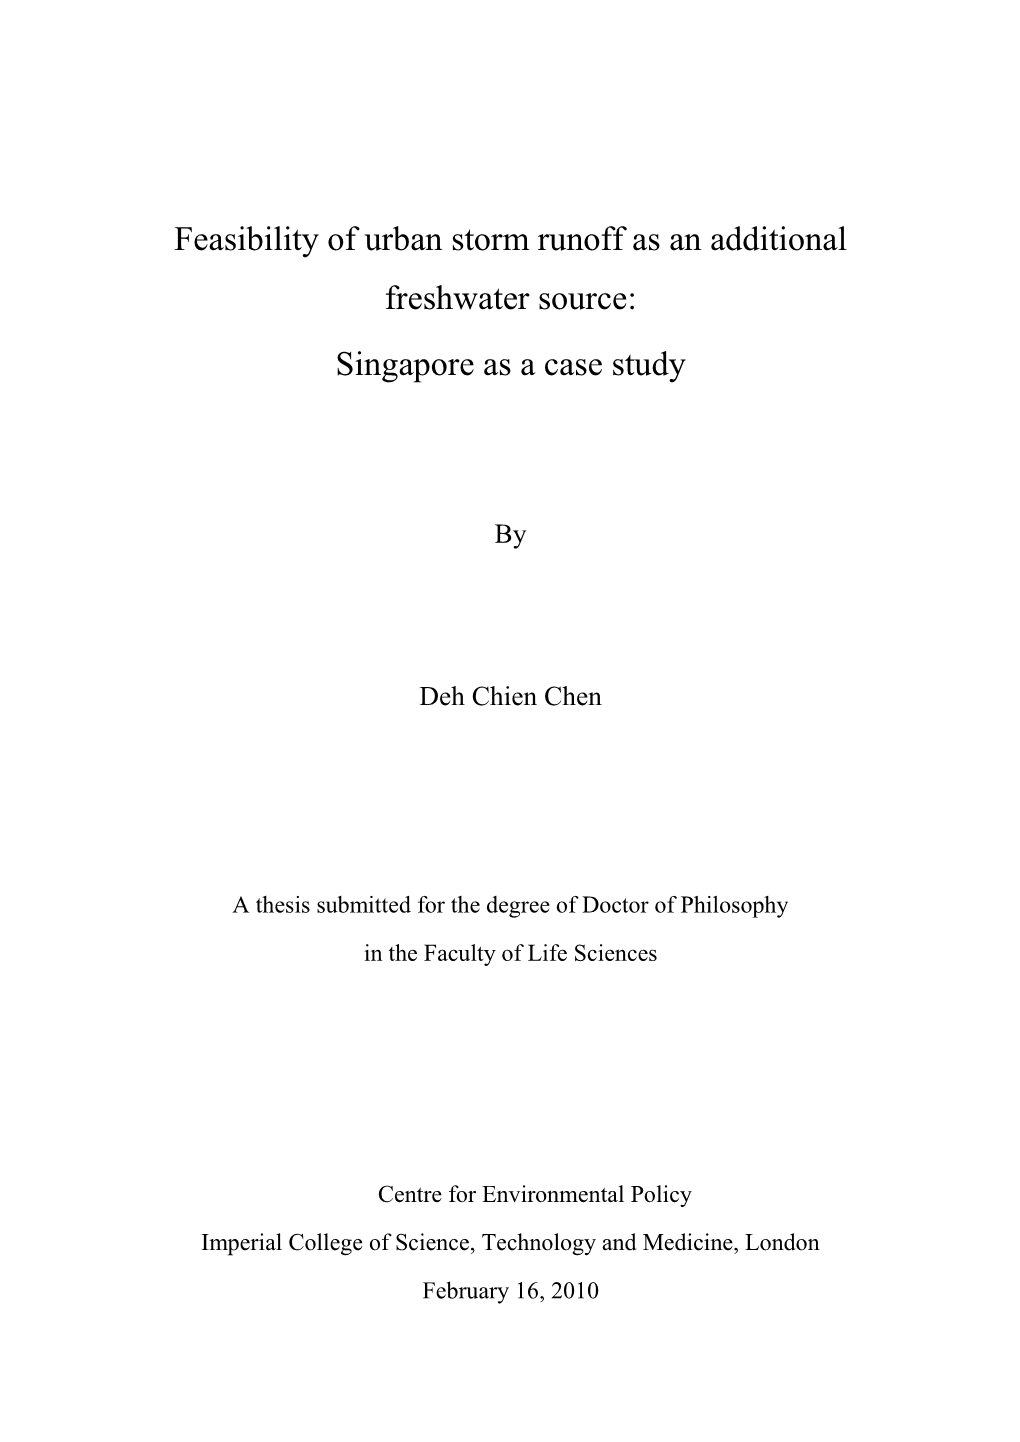 Feasibility of Urban Storm Runoff As an Additional Freshwater Source: Singapore As a Case Study